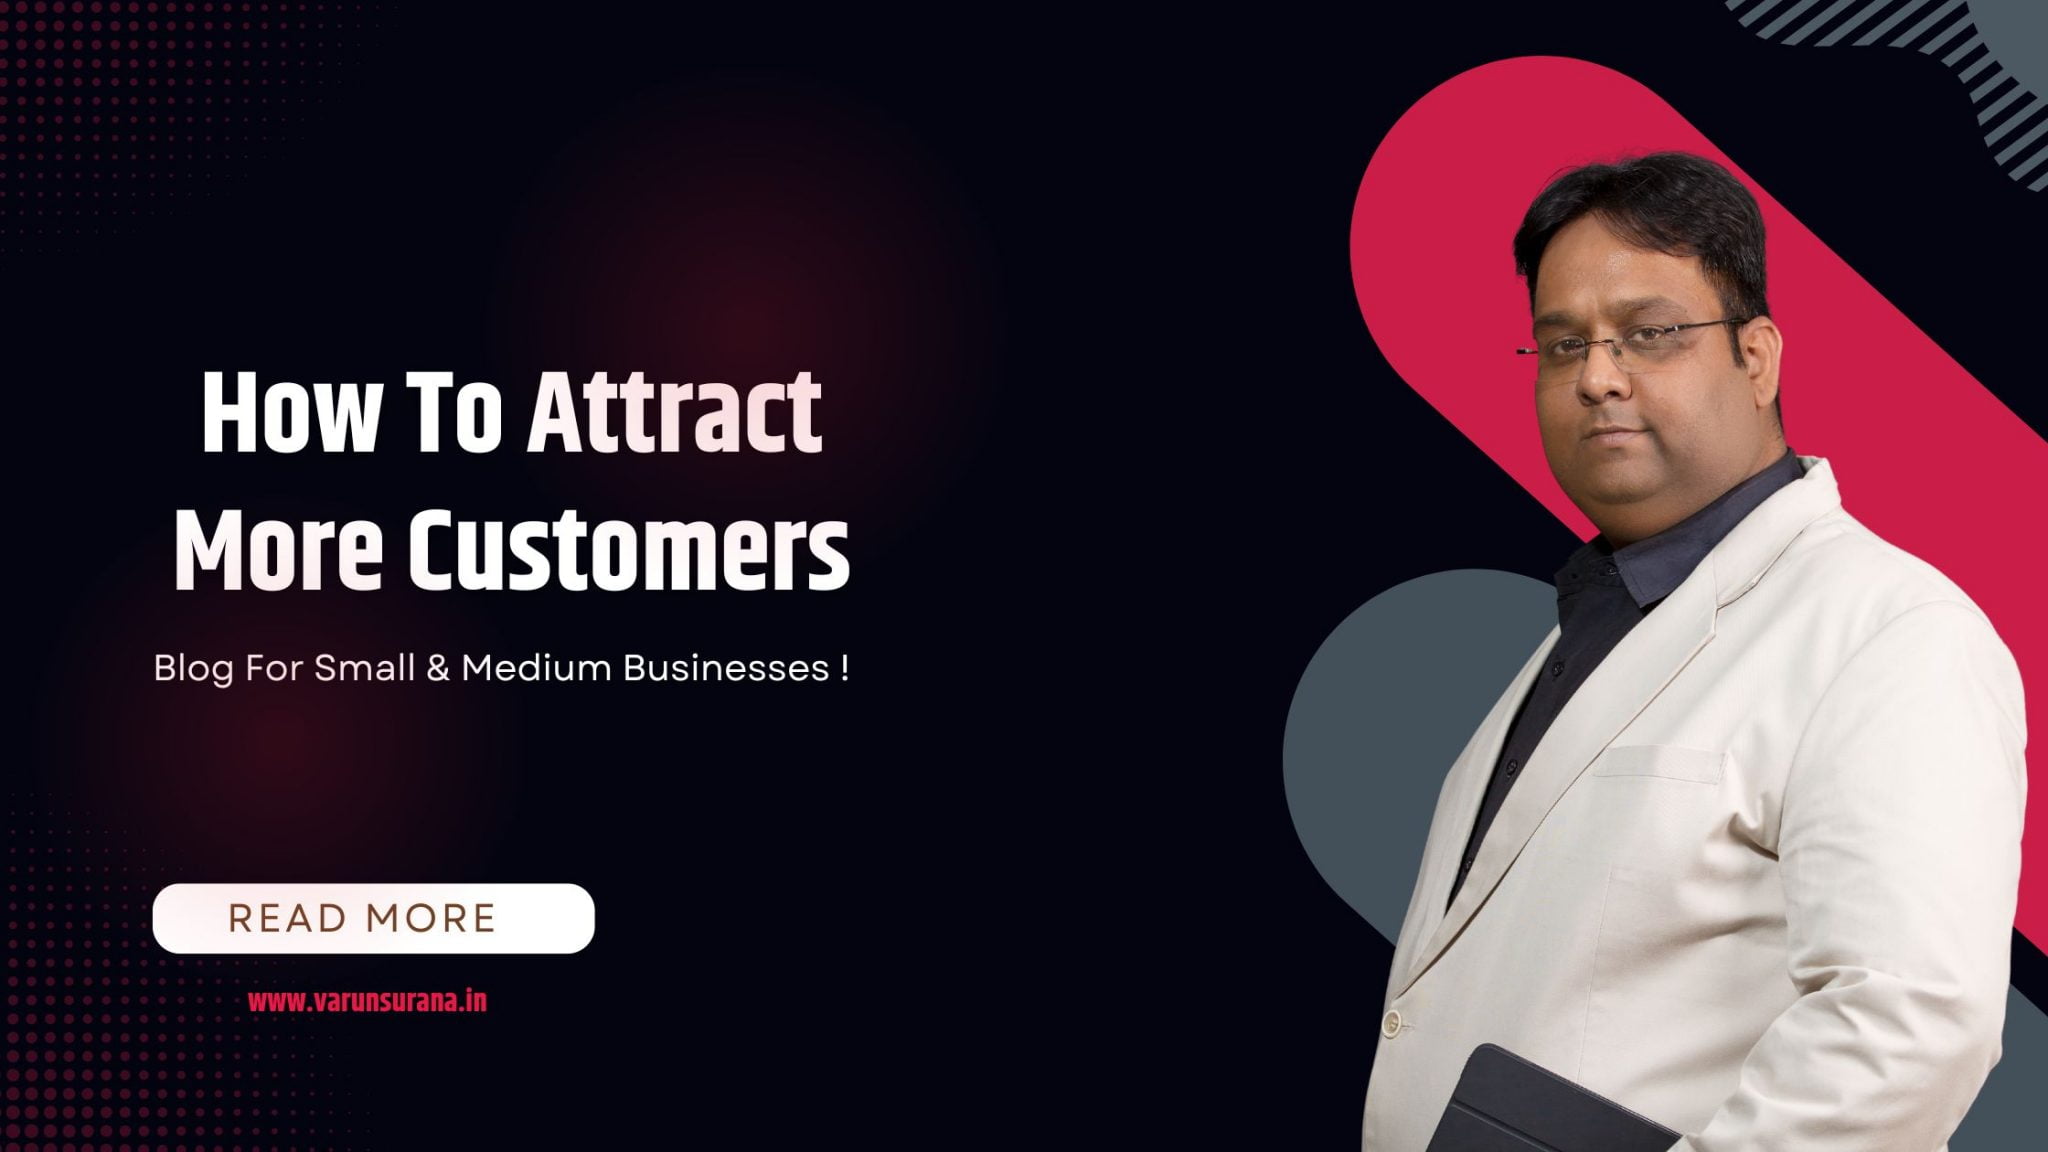 How to Attract More Customers?